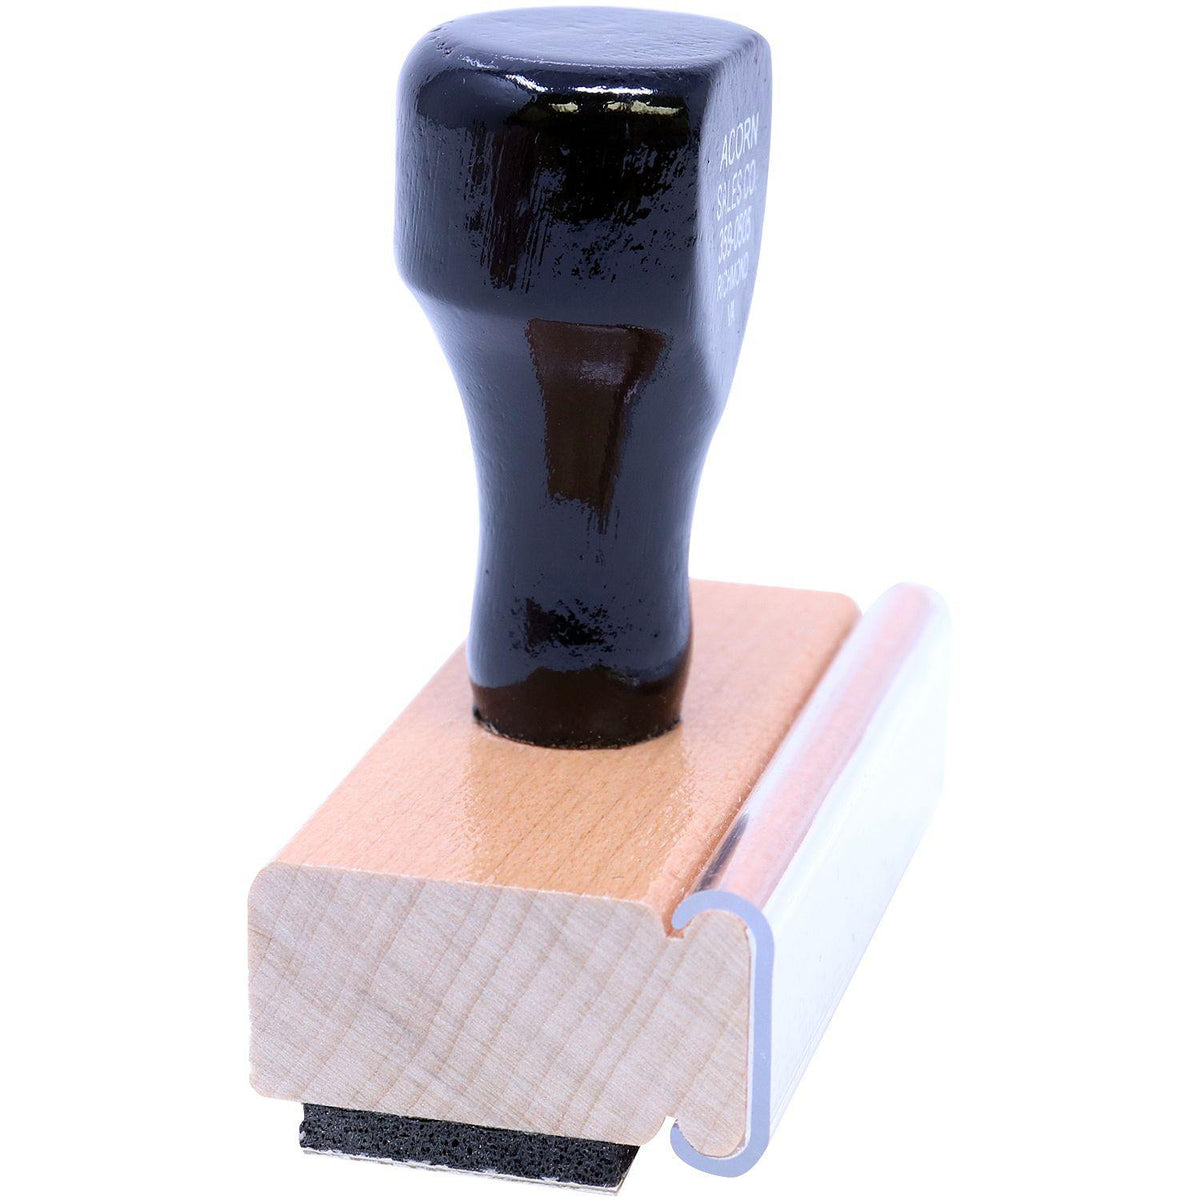 Side View of Archivar Rubber Stamp at an Angle